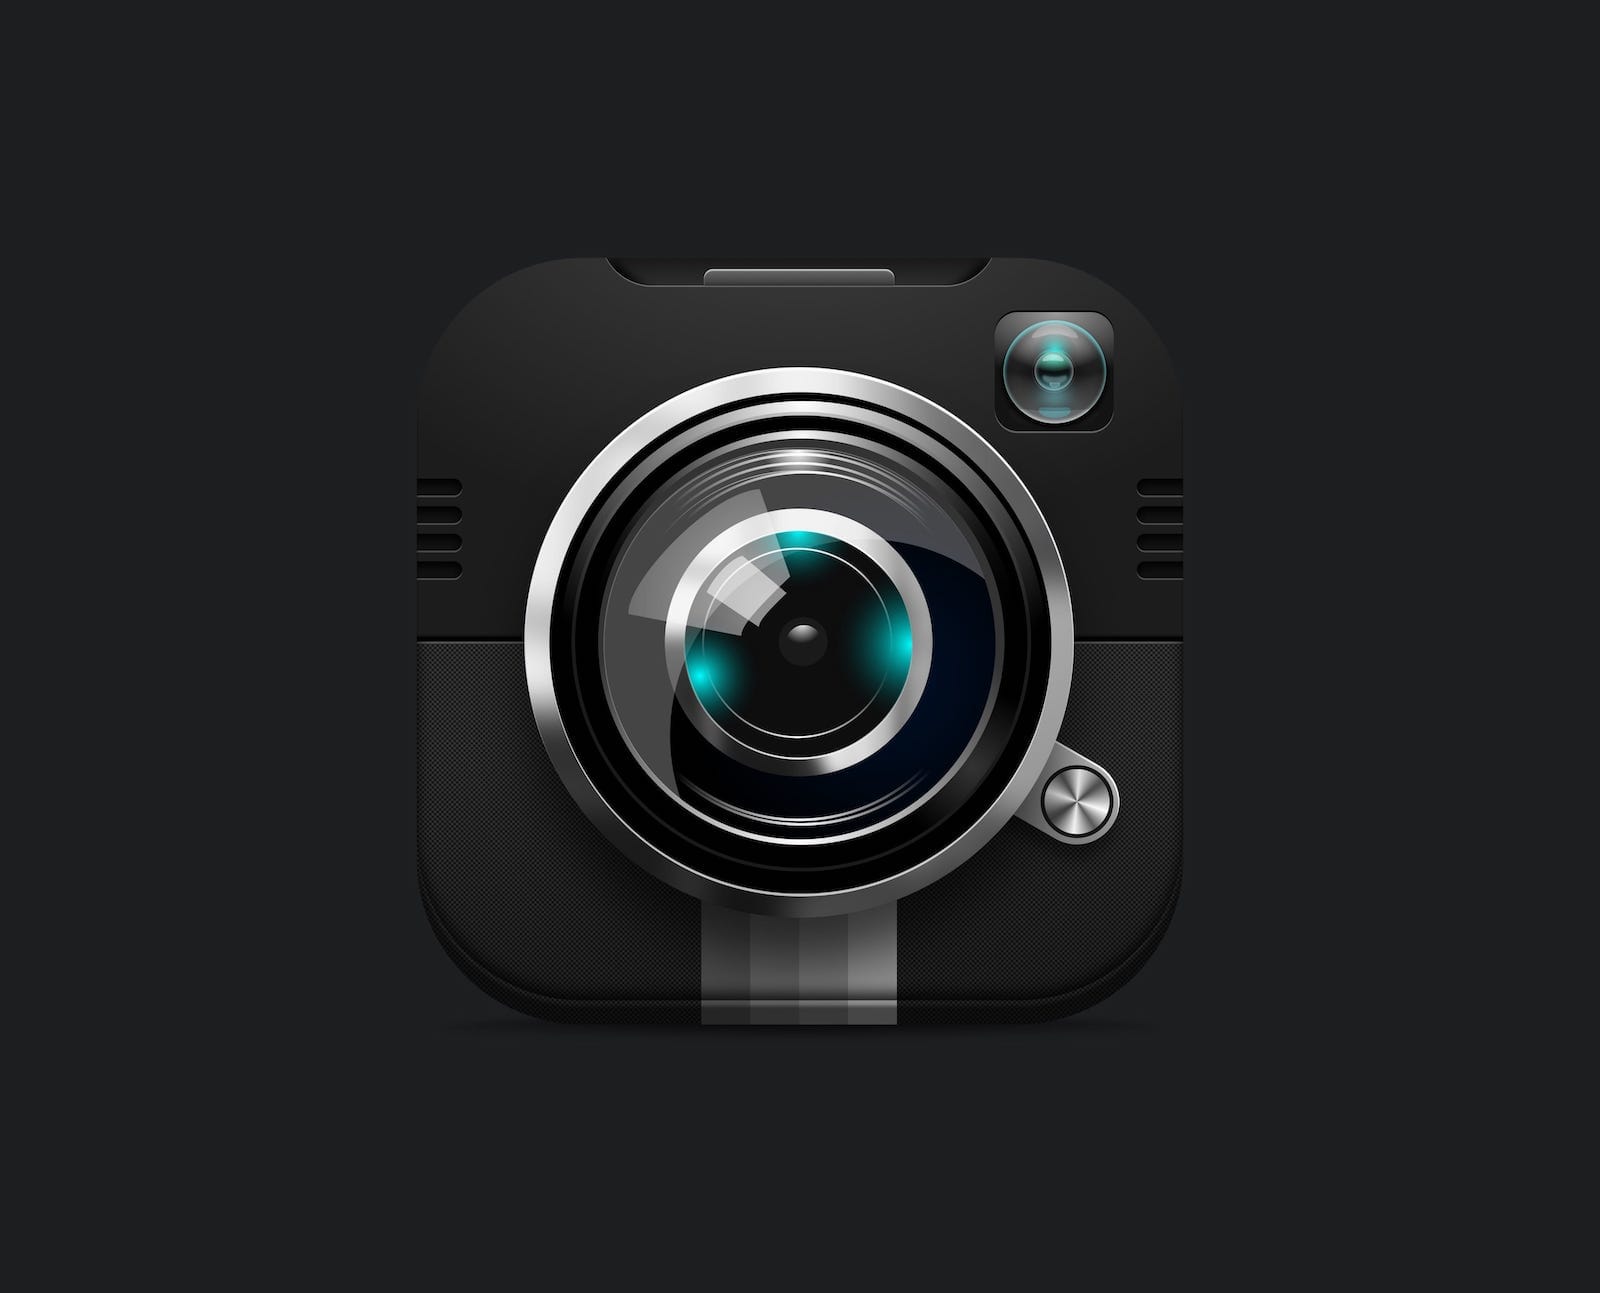 Camera and lens icon in black and gray, with small turqoise flare in the lens.